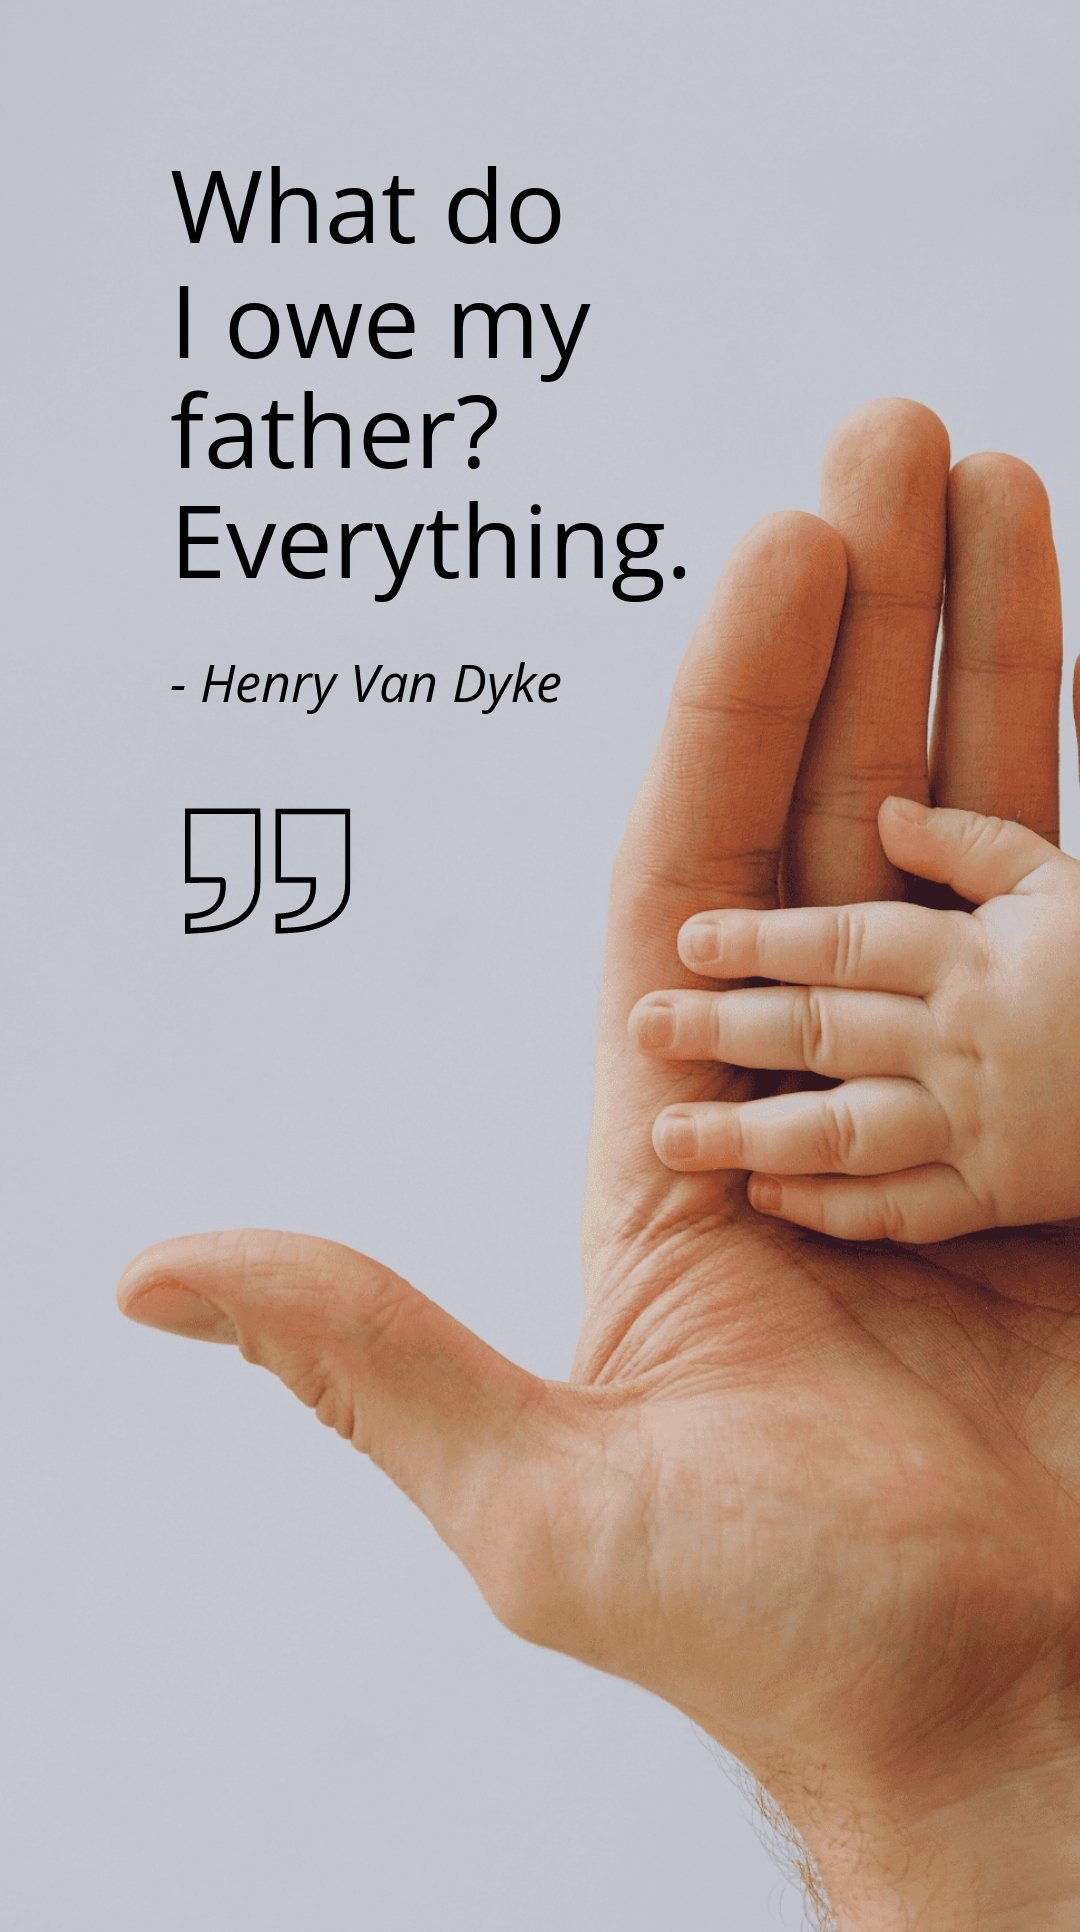 Henry Van Dyke - What do I owe my father? Everything.